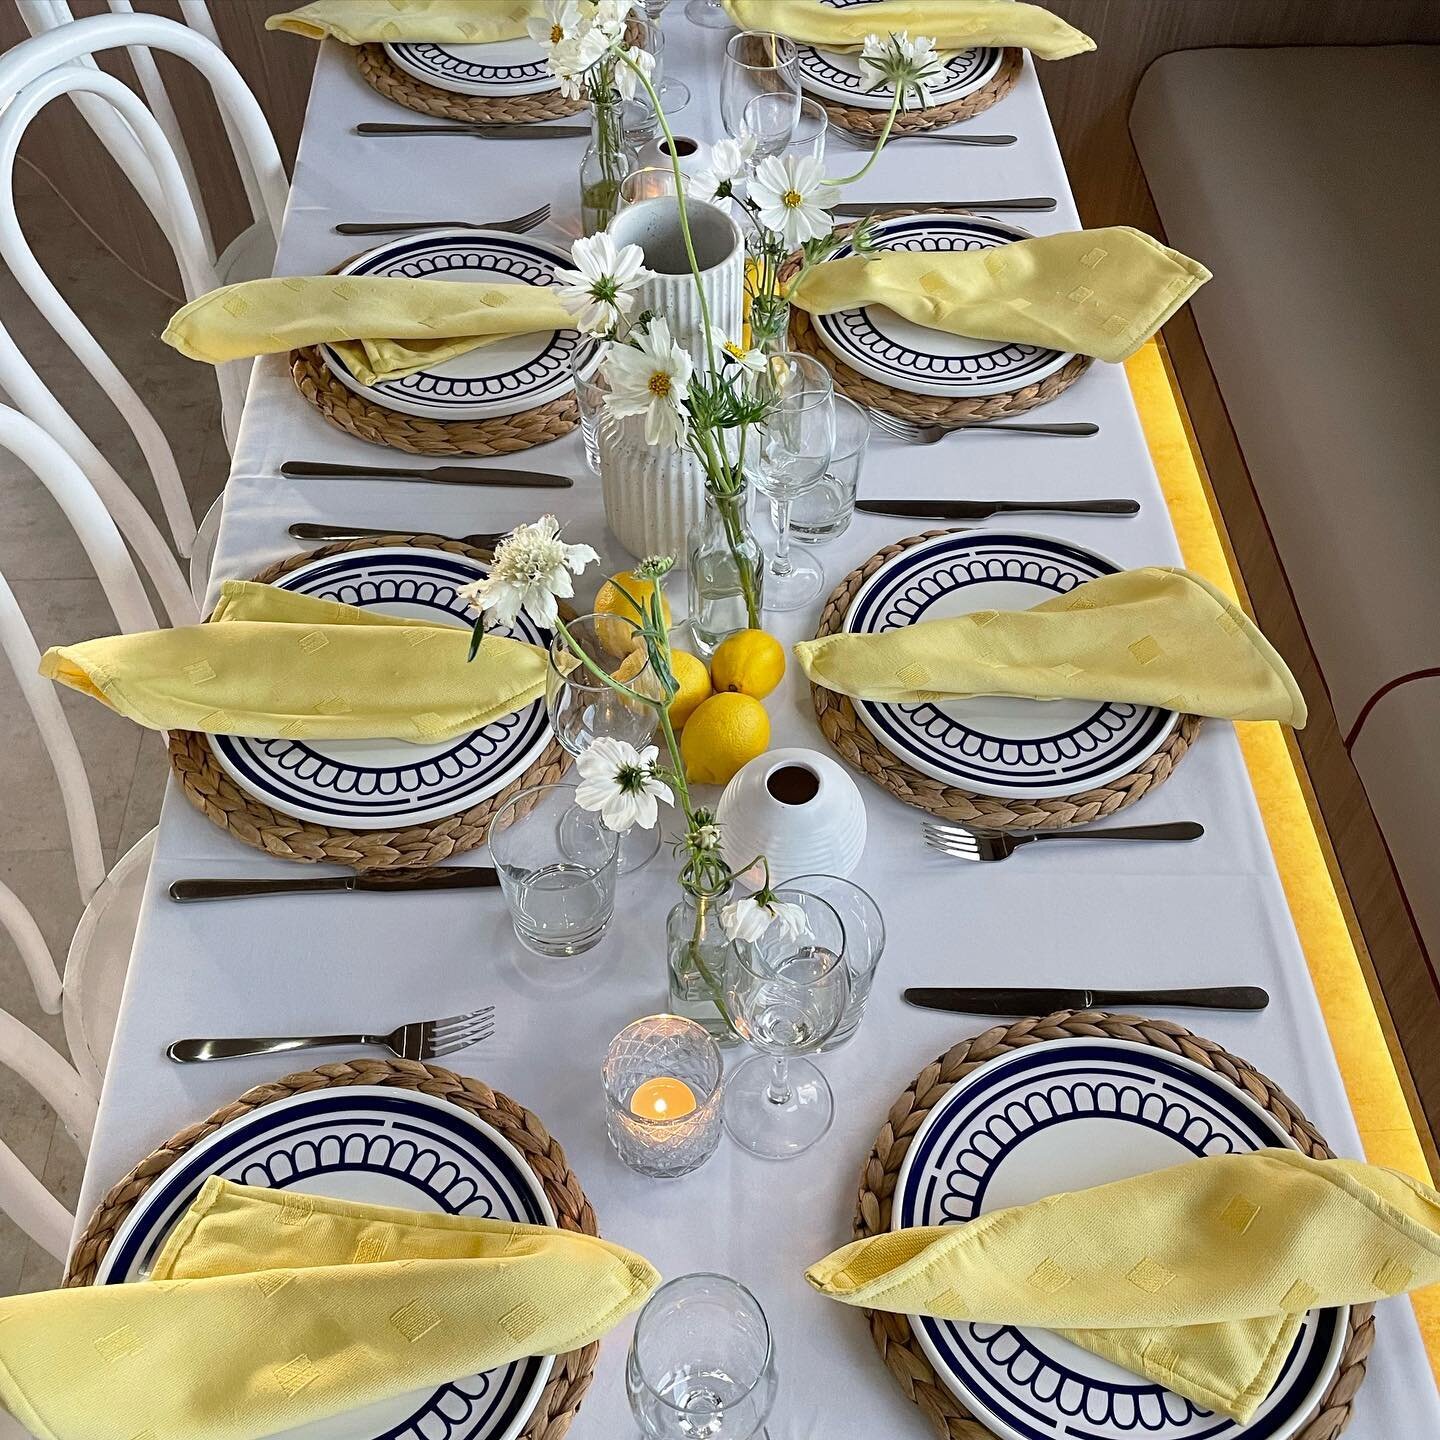 European summer vibes for this intimate lunch on board @karismacruises #sydneyharbour #floraldesigns #sydneyweddings #eventstyling #events #flowersofinstagram #sydneyevents #sydneyvenues #sydneyharbour #darlingevents #karisma #boatparty